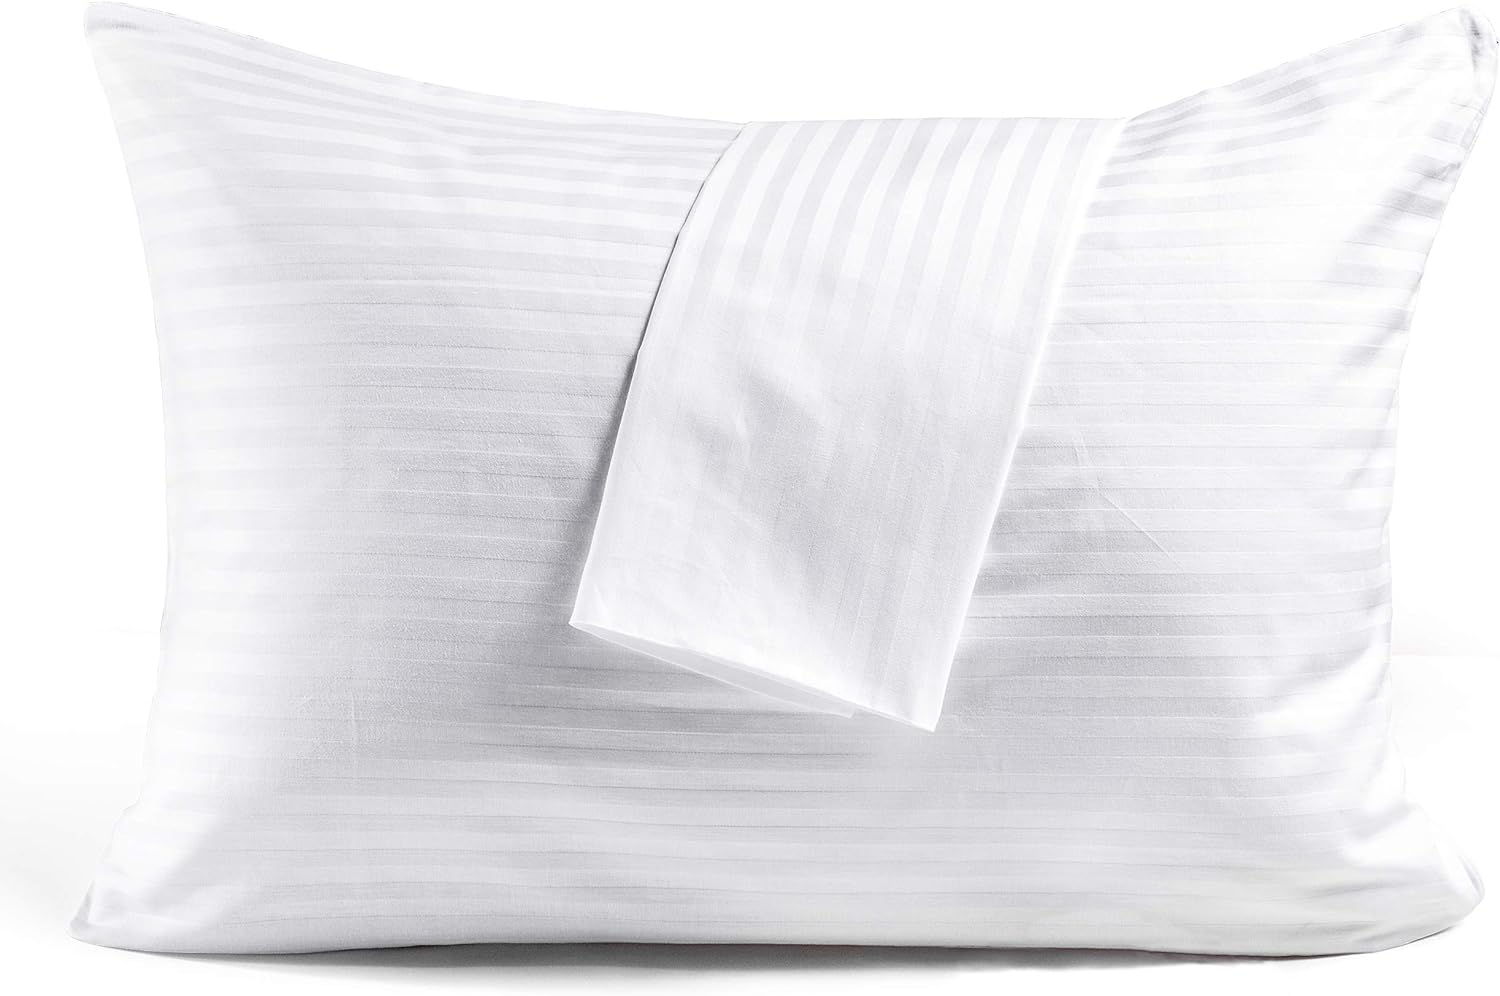 FAUNNA Zippered 100% Cotton Pillow Protectors Cover Case - Comfortable/Quiet Sateen Long-Staple Cotton- Soft & Breathable Pillowcase Standard Size 2 Pack